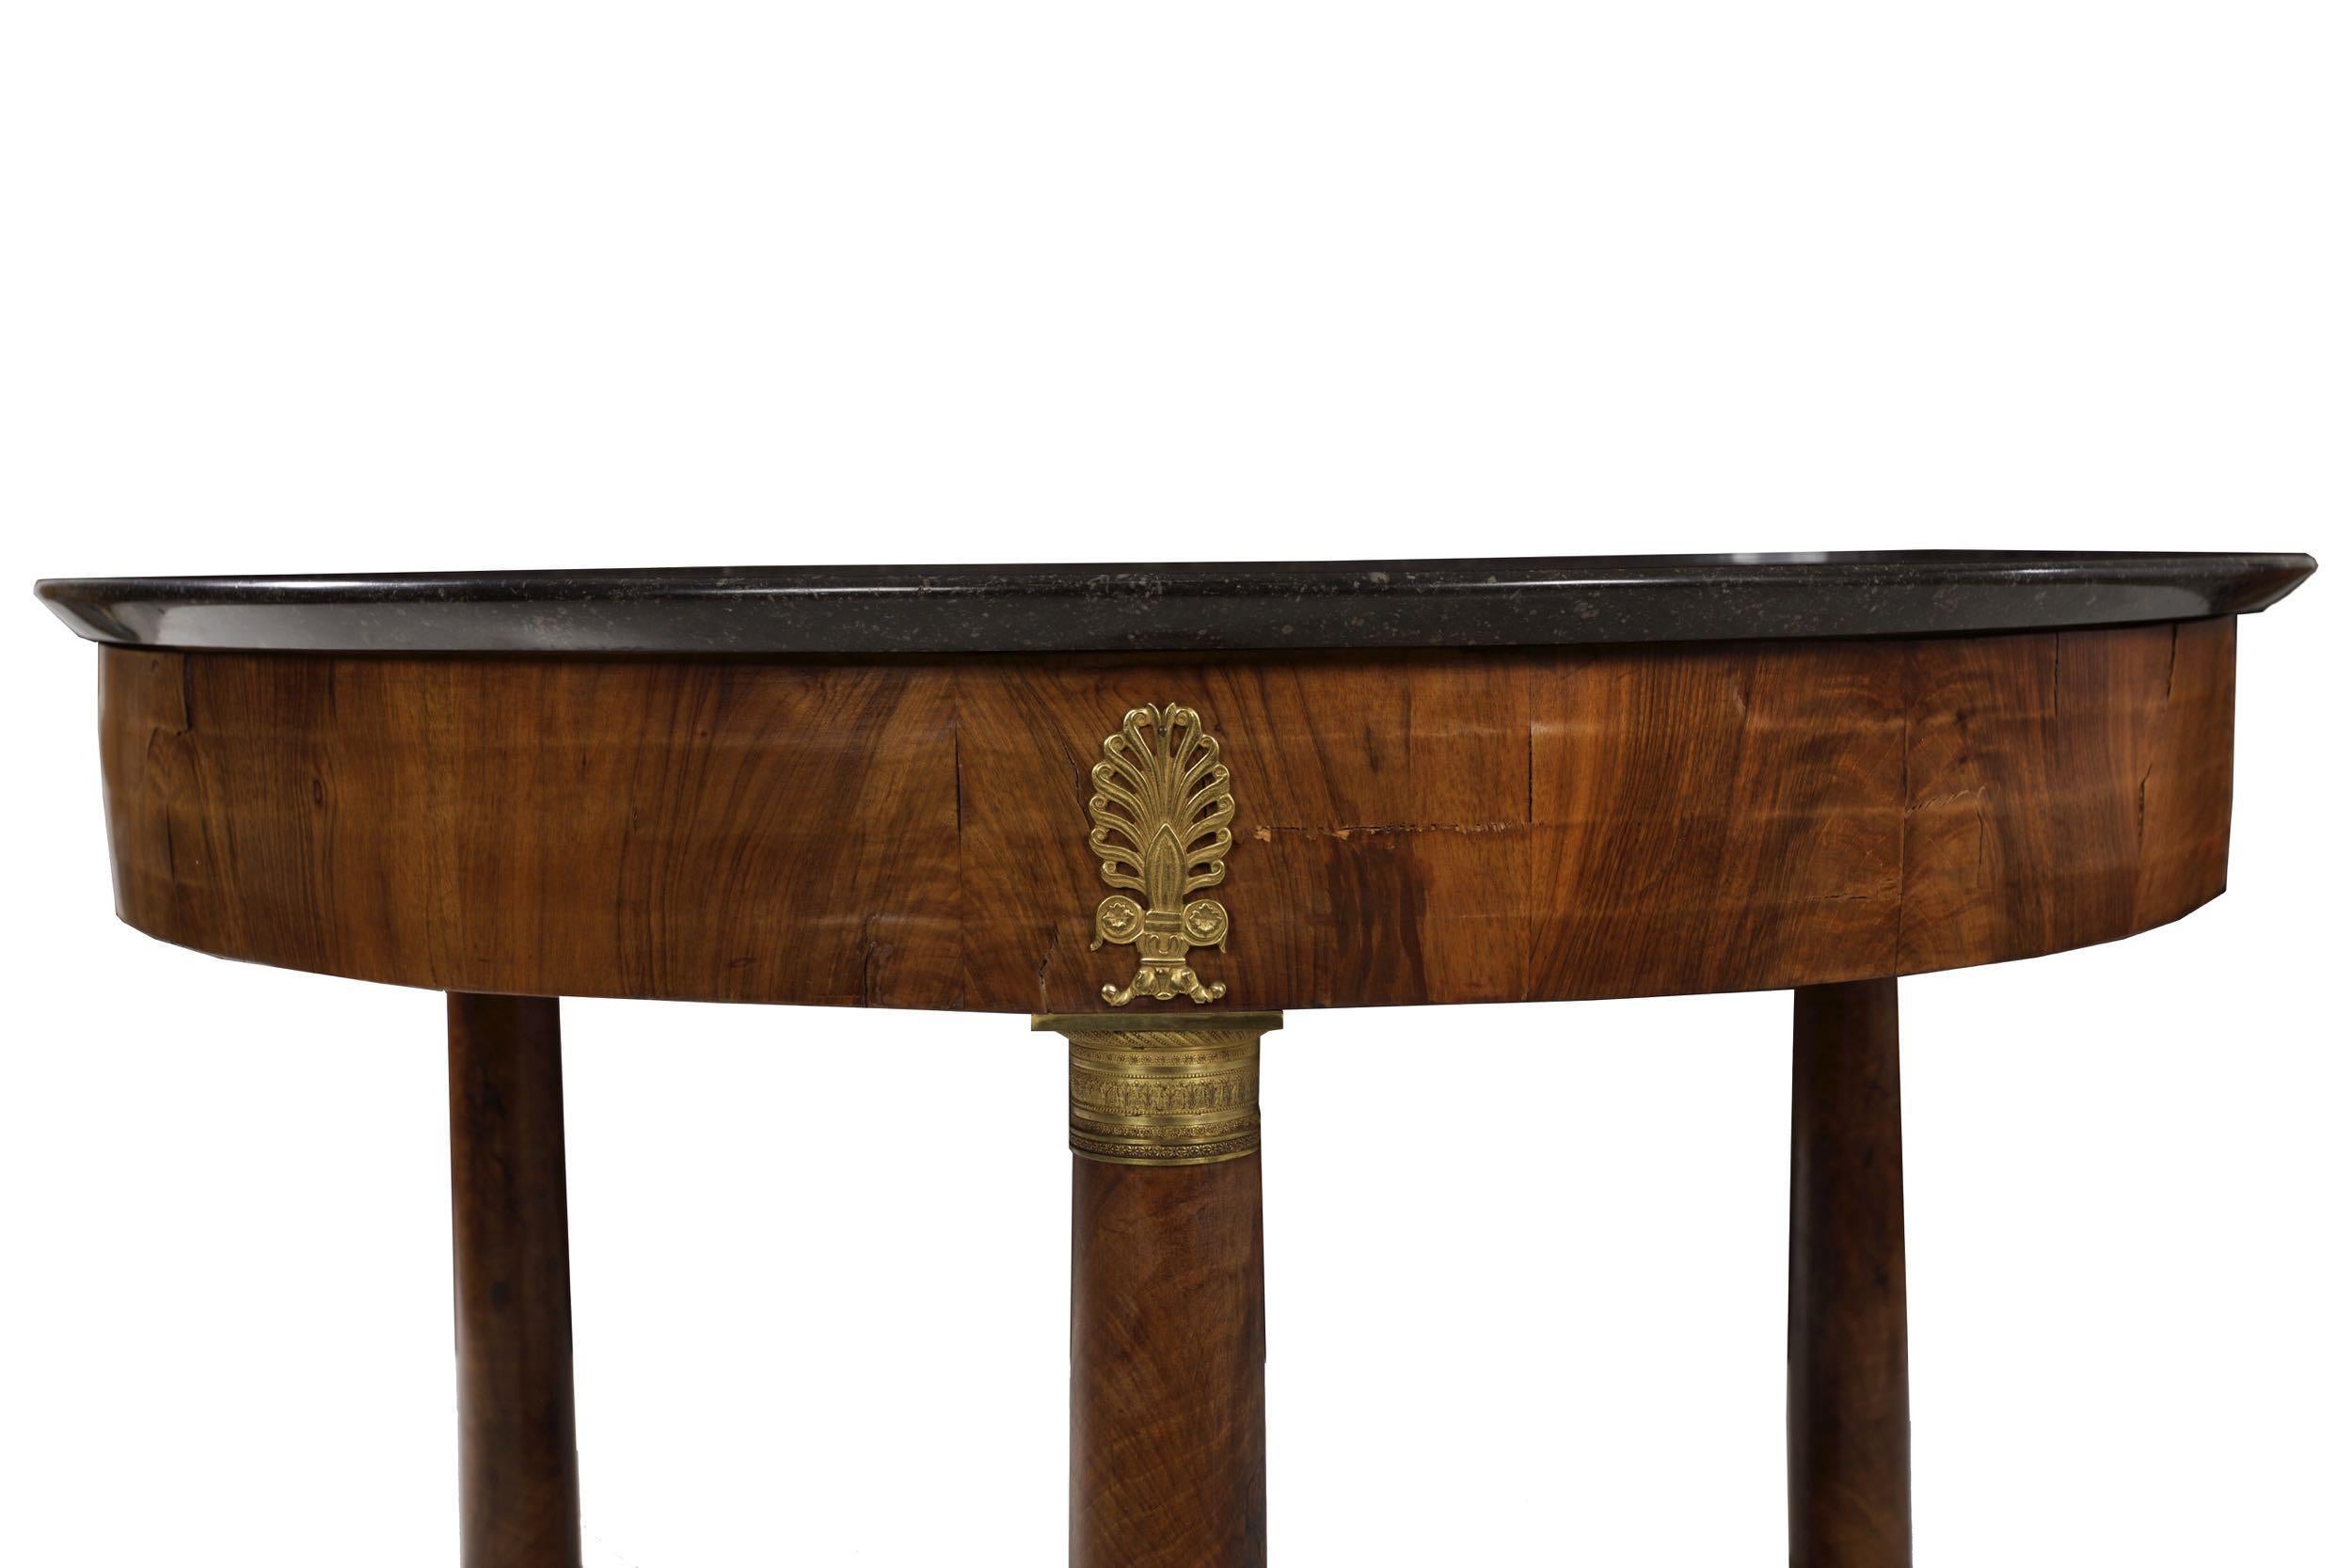 French Empire Antique Burl Walnut Center Table with Black Marble Top, circa 1815 For Sale 6